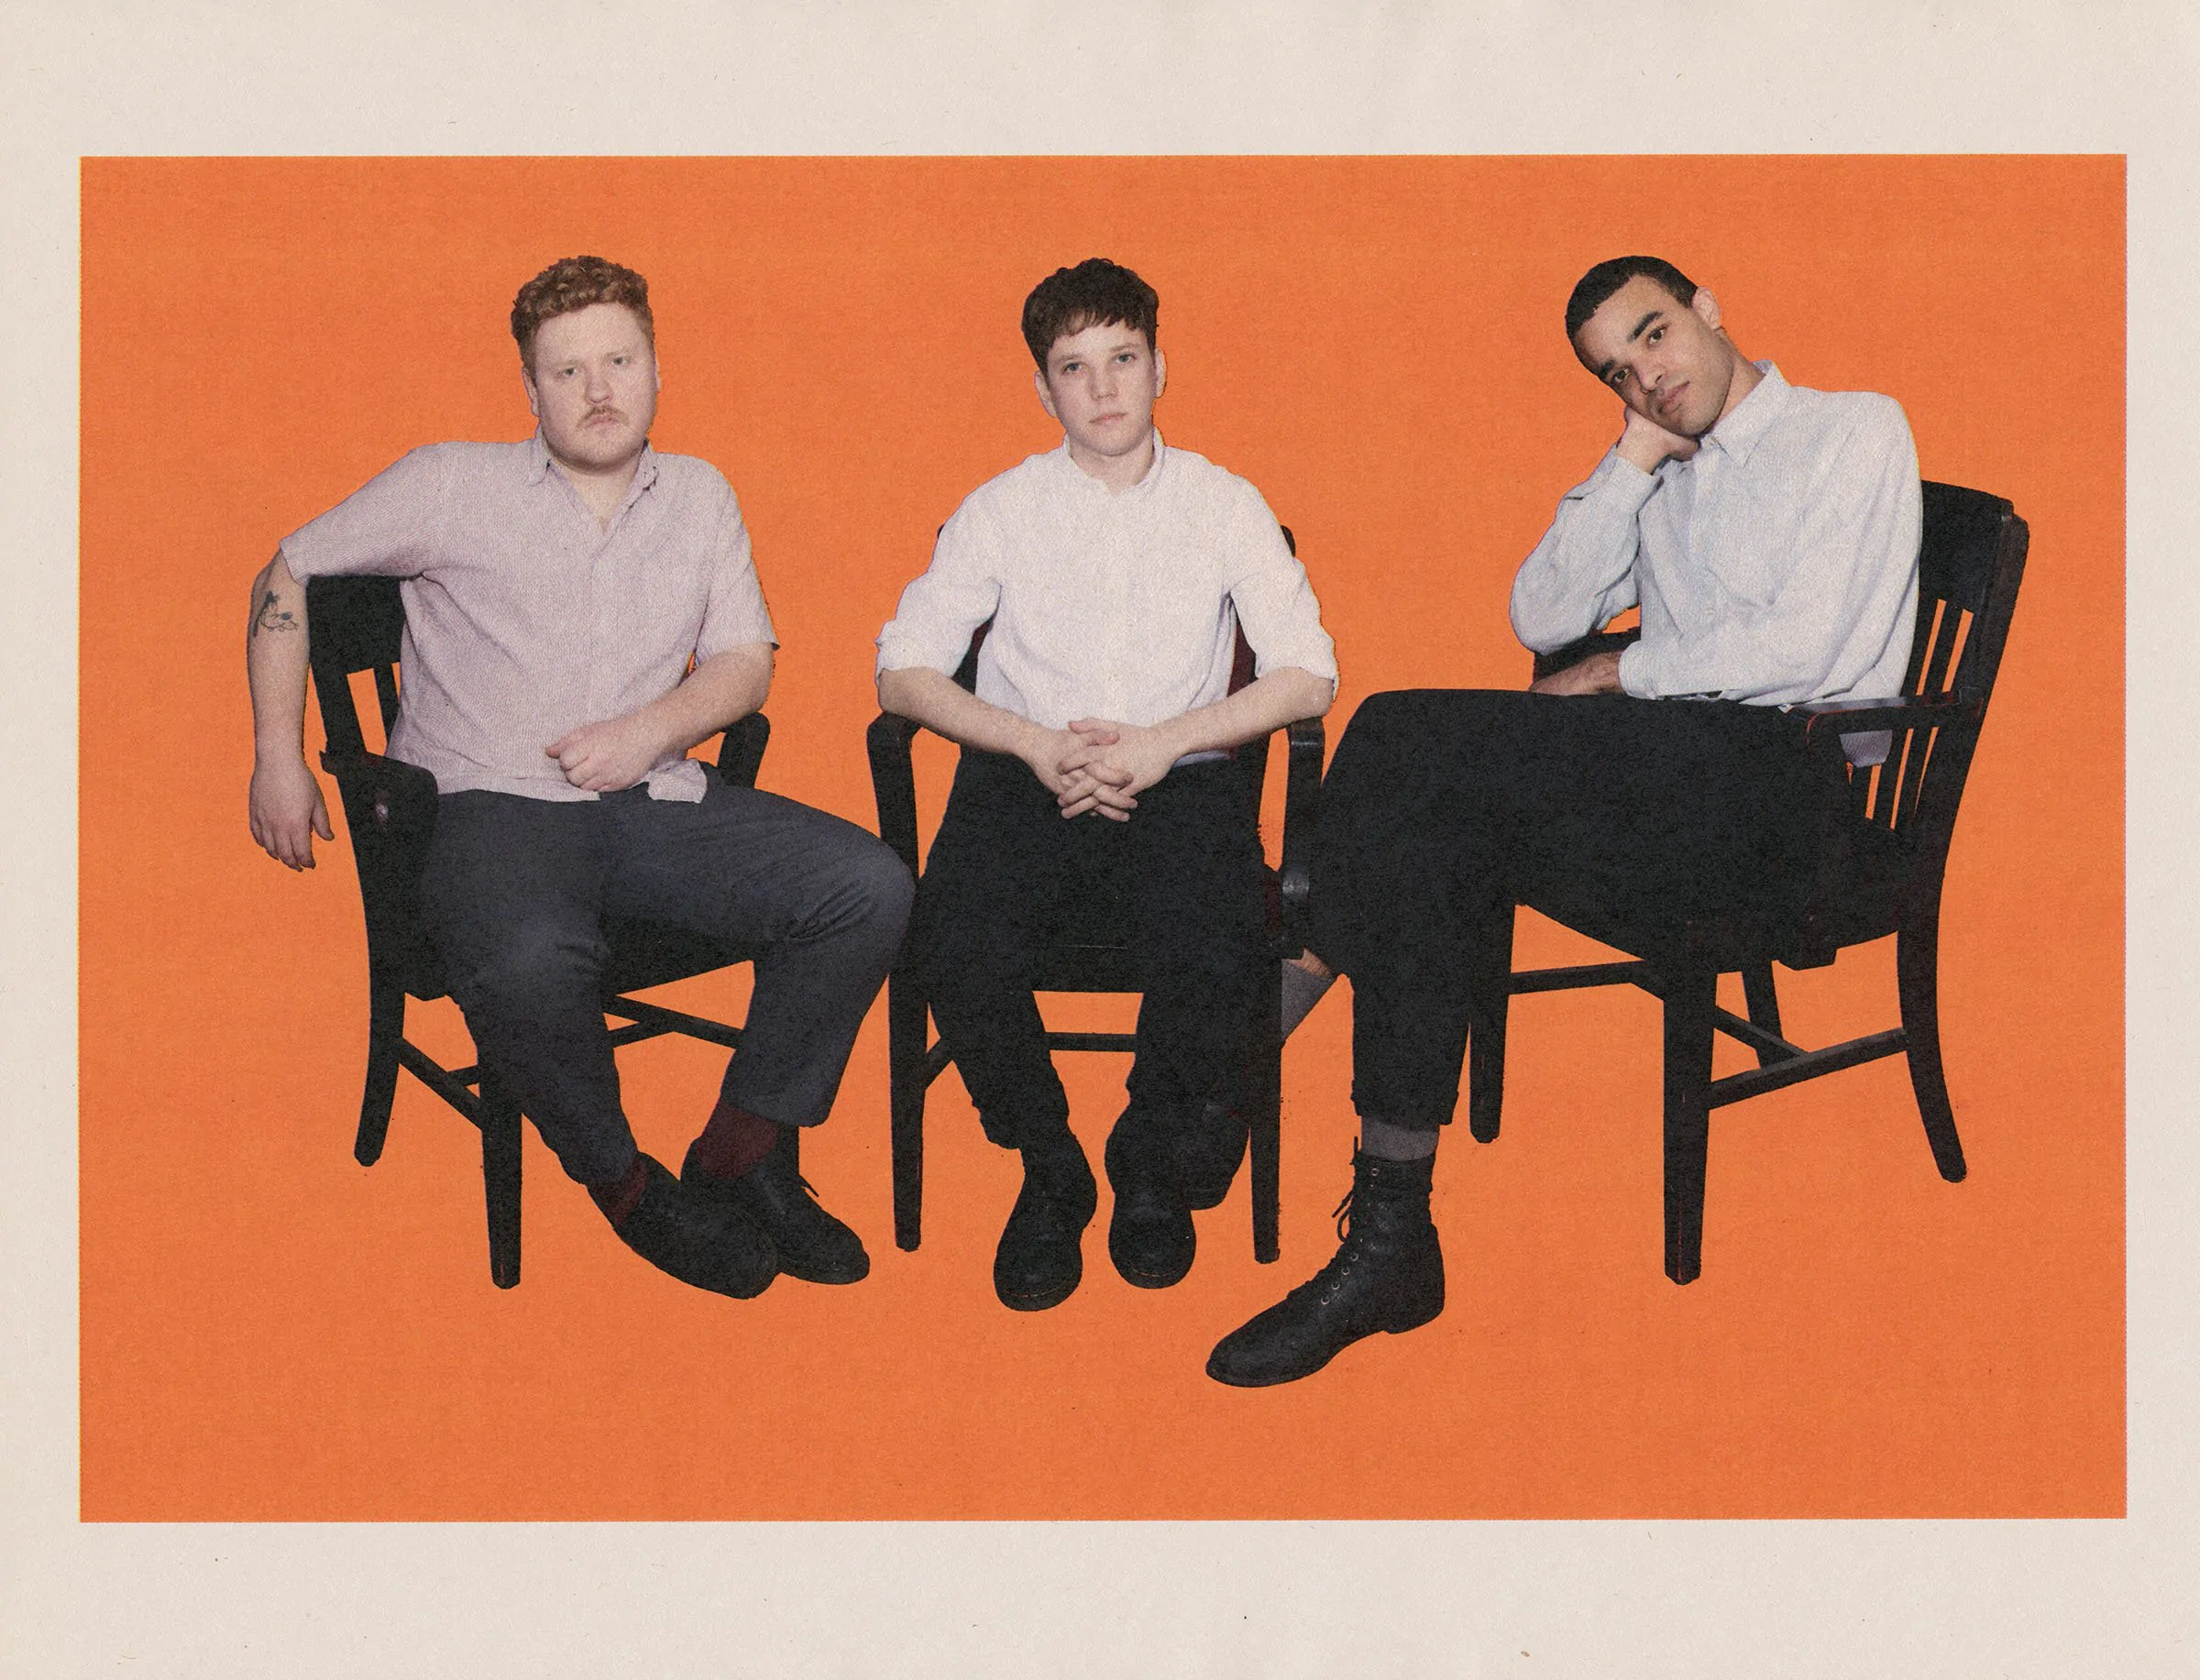 MOANING – Announce new album ‘Uneasy Laughter’ due March 20th via Sub Pop